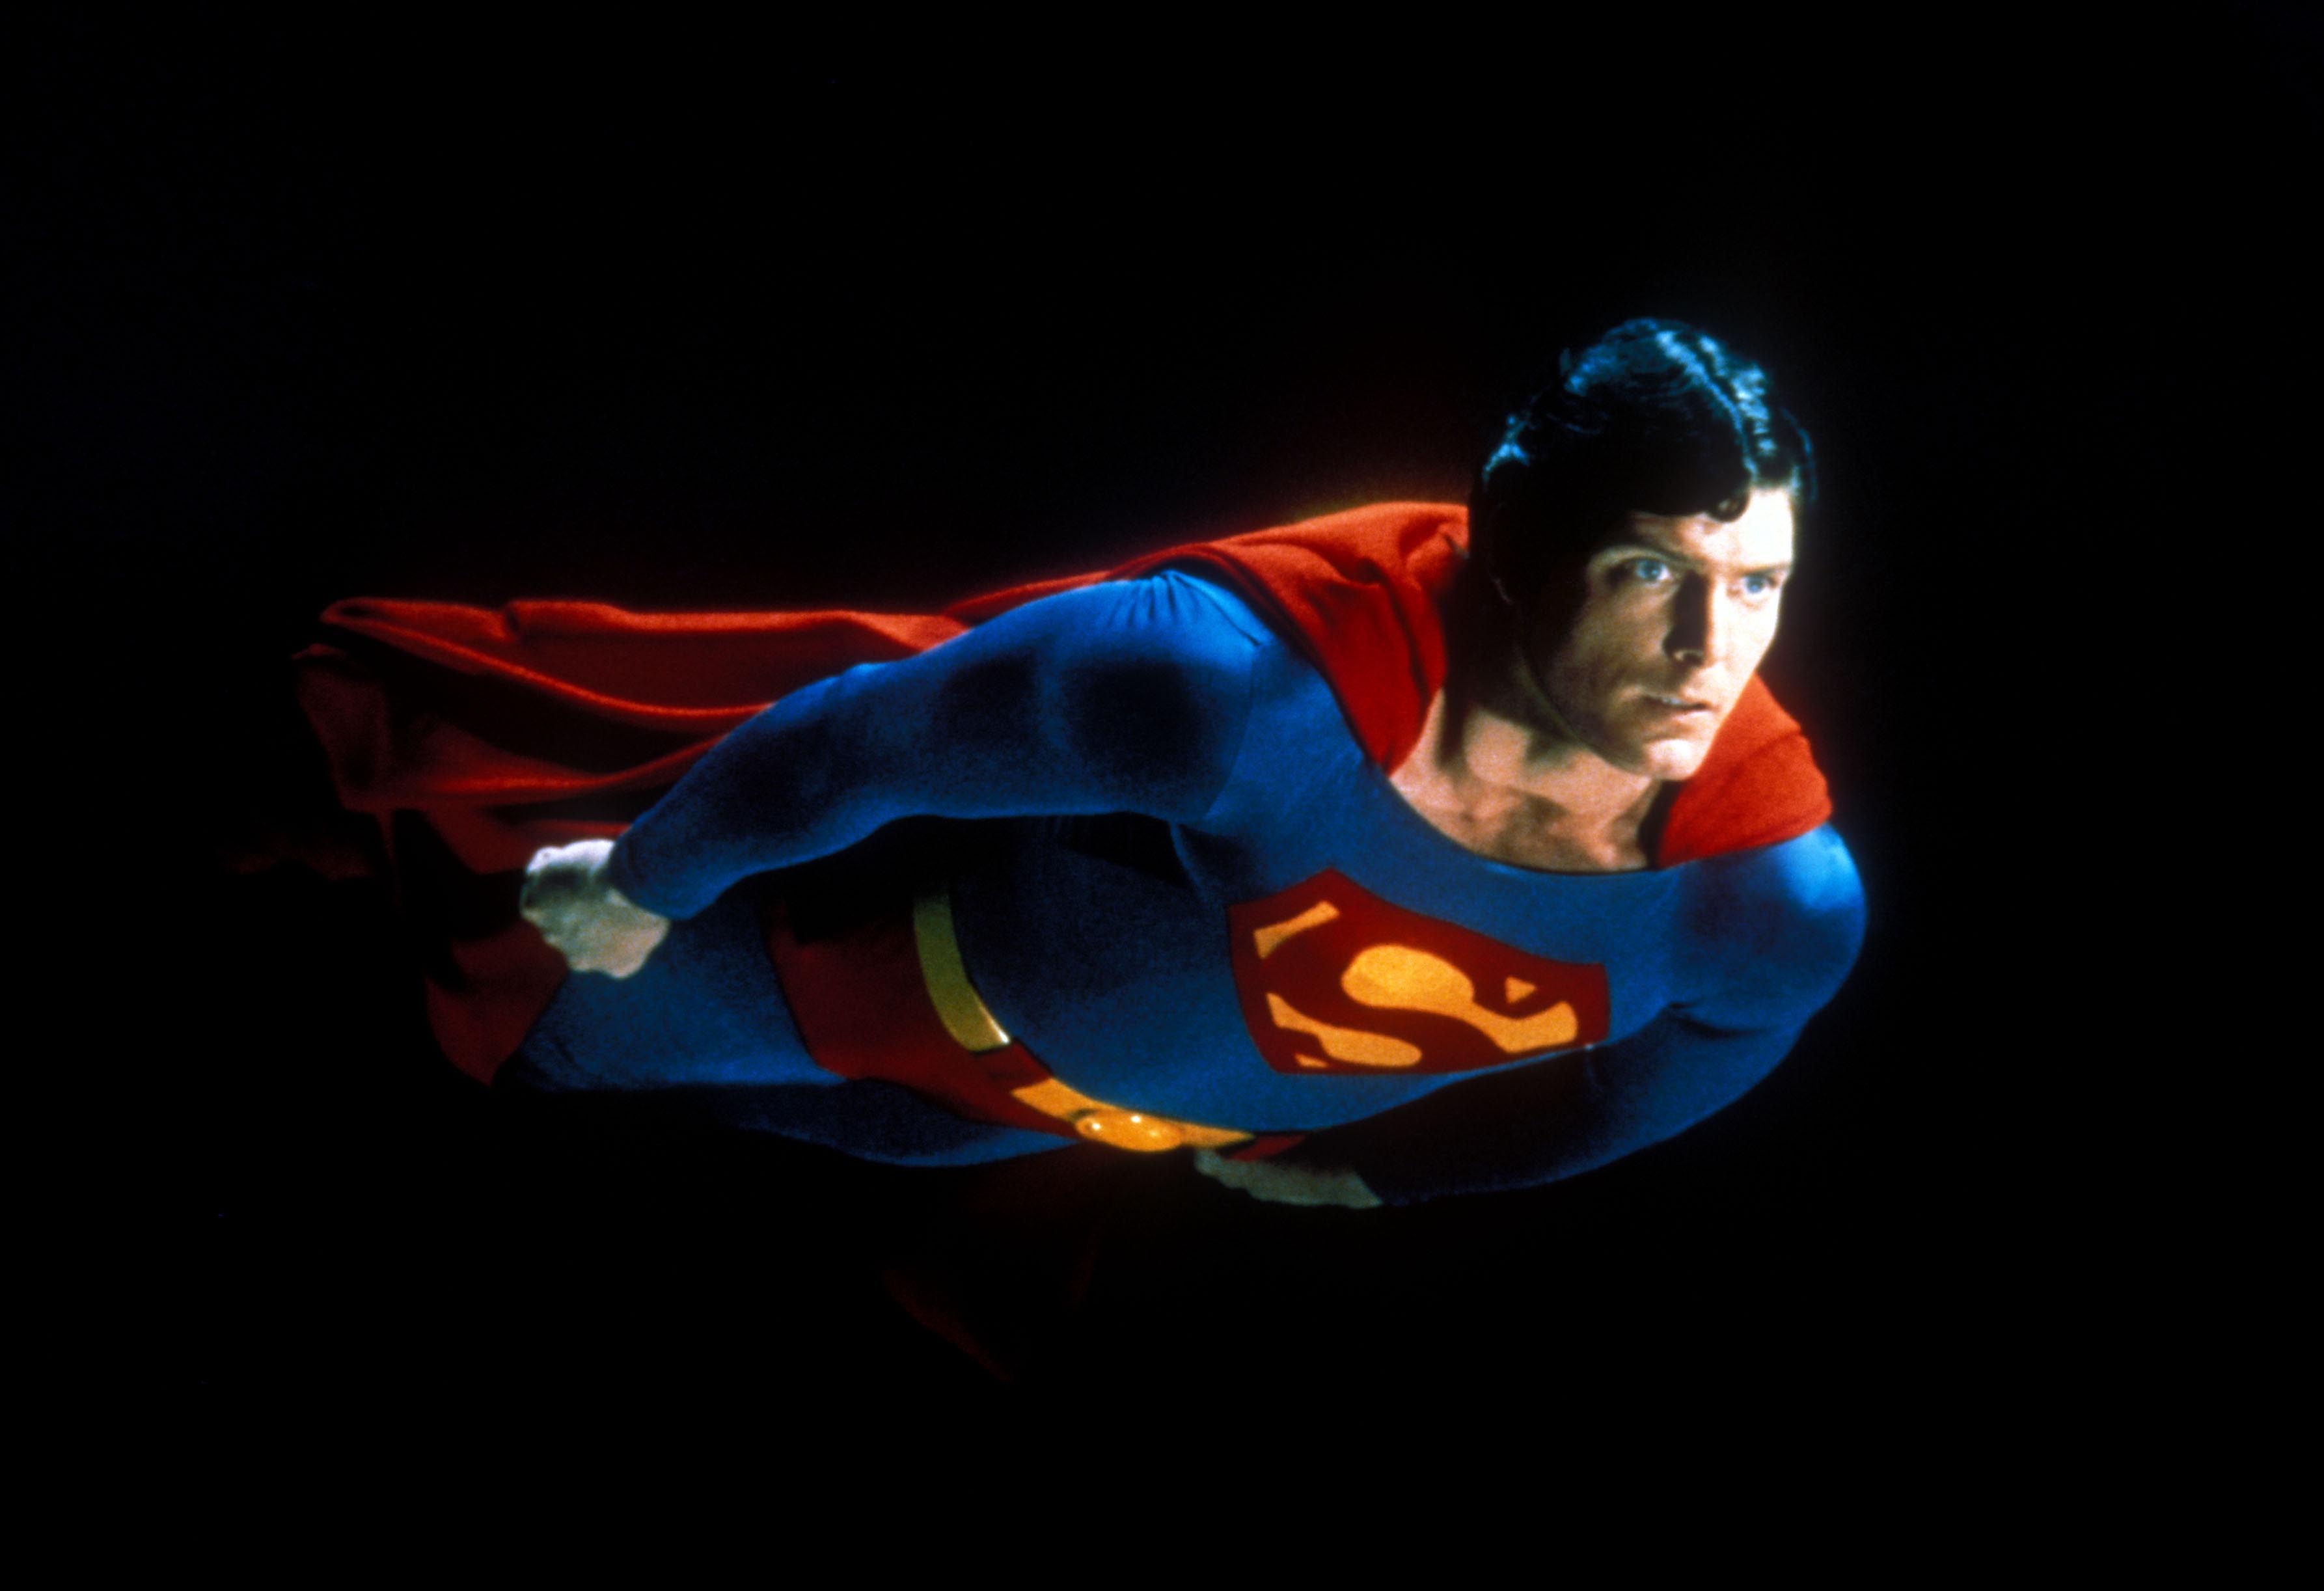 Christopher Reeve Appearance in 'Man of Steel